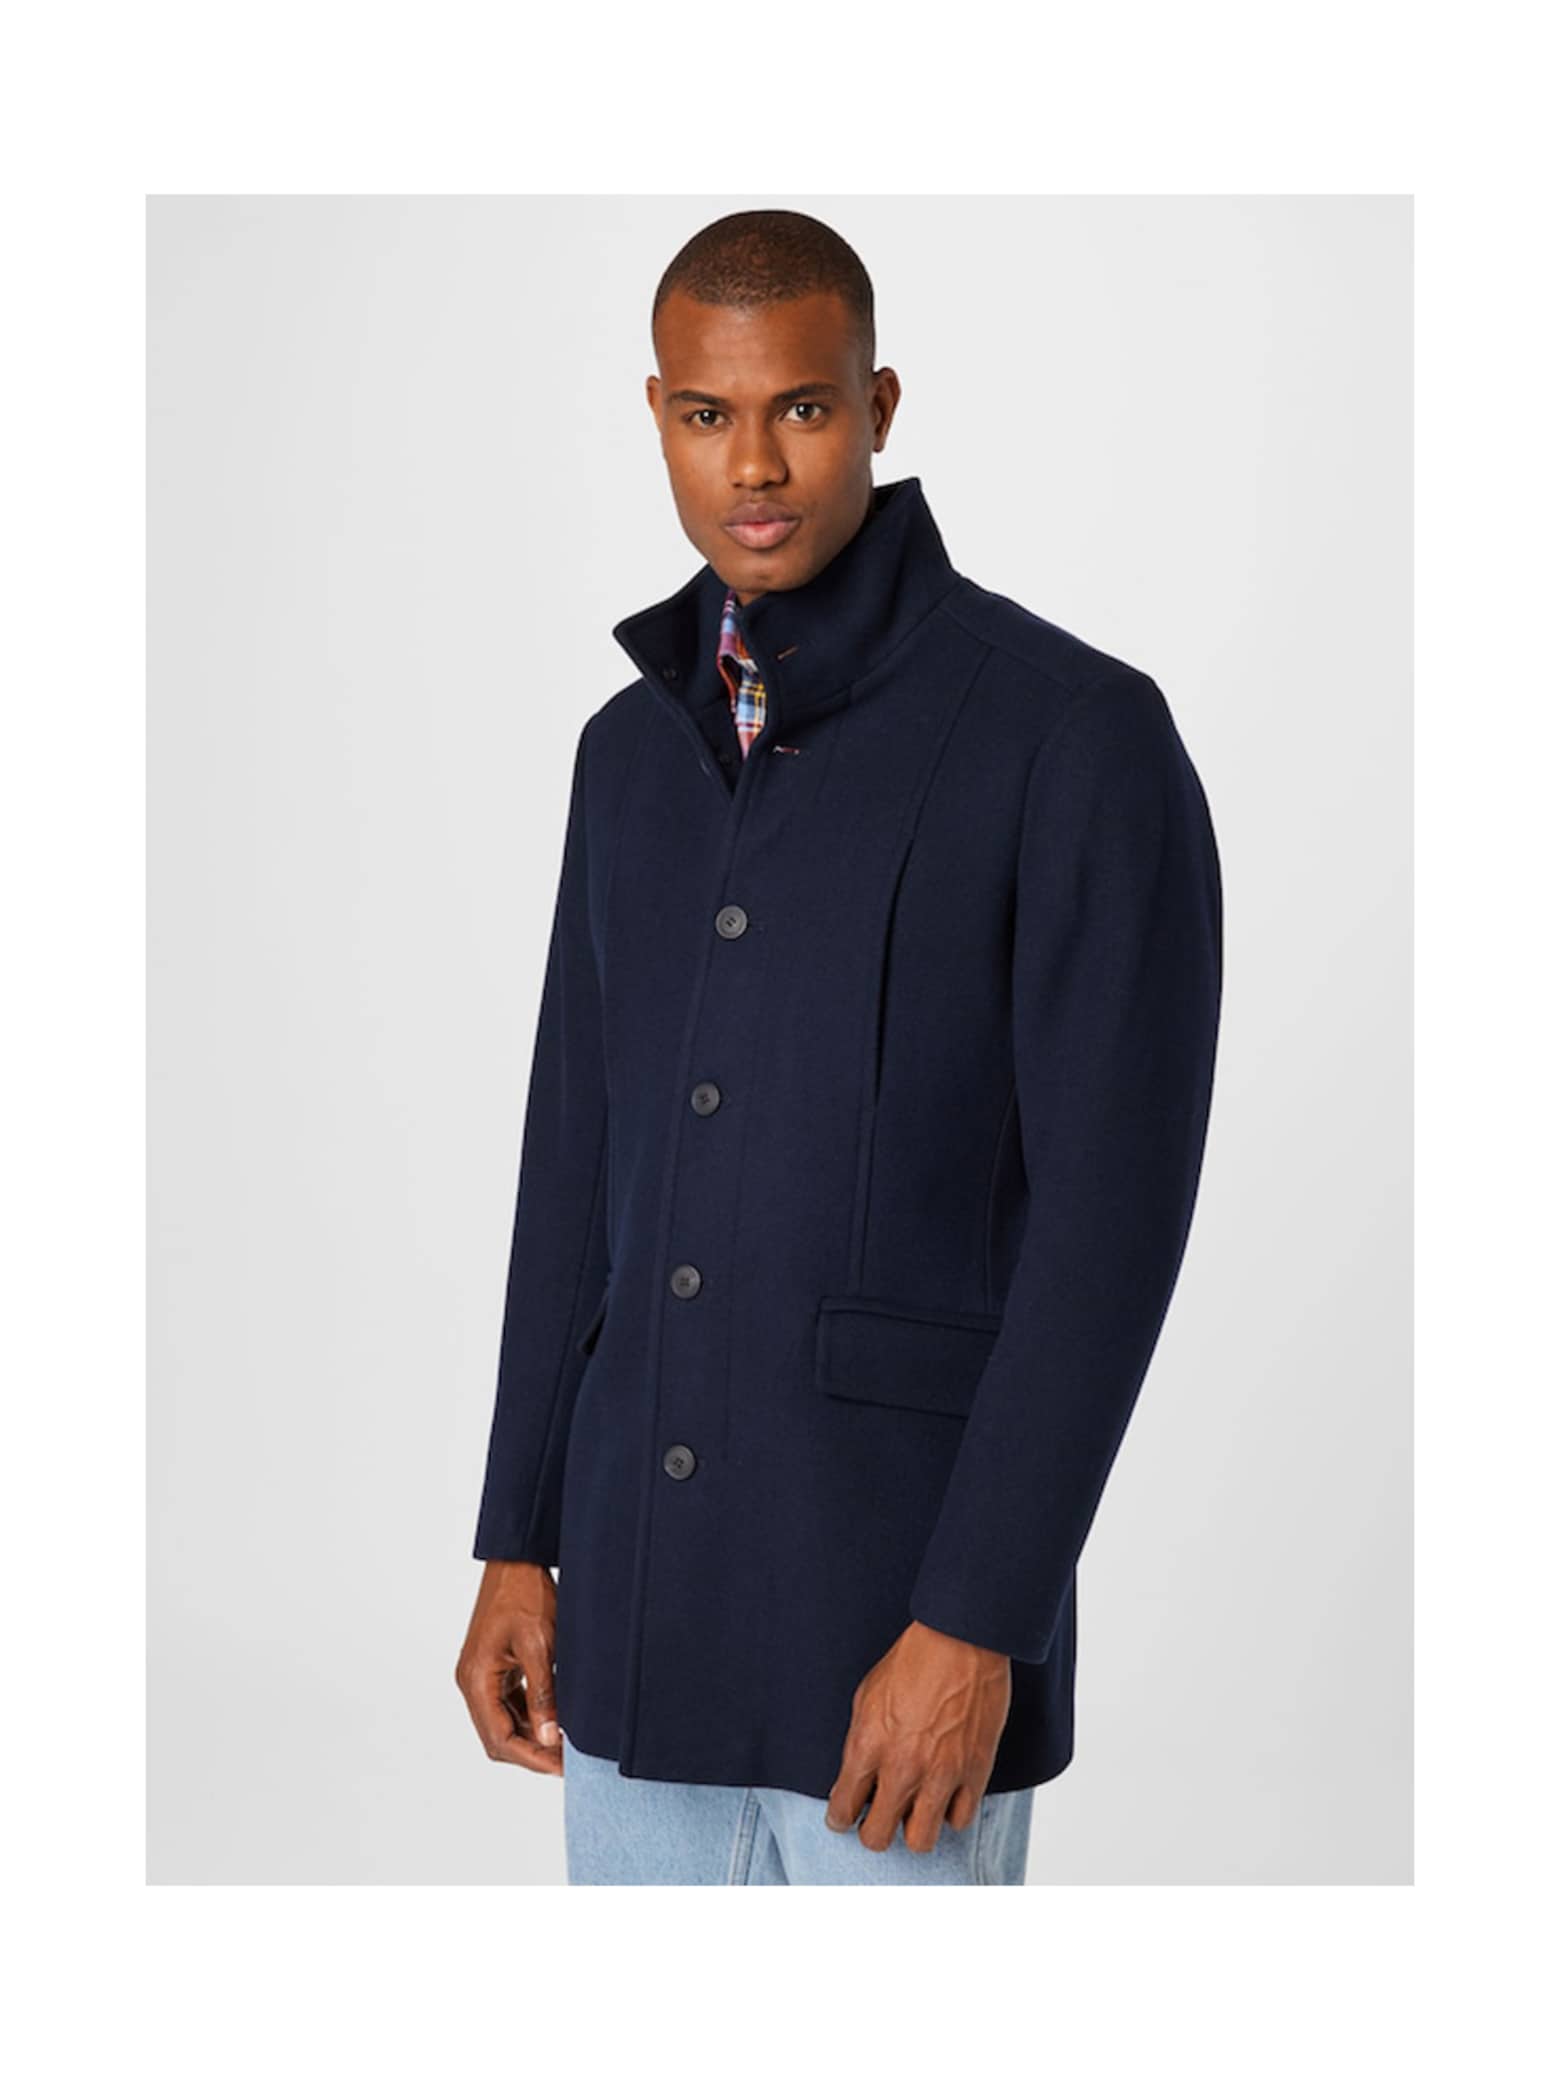 Save now! Coats